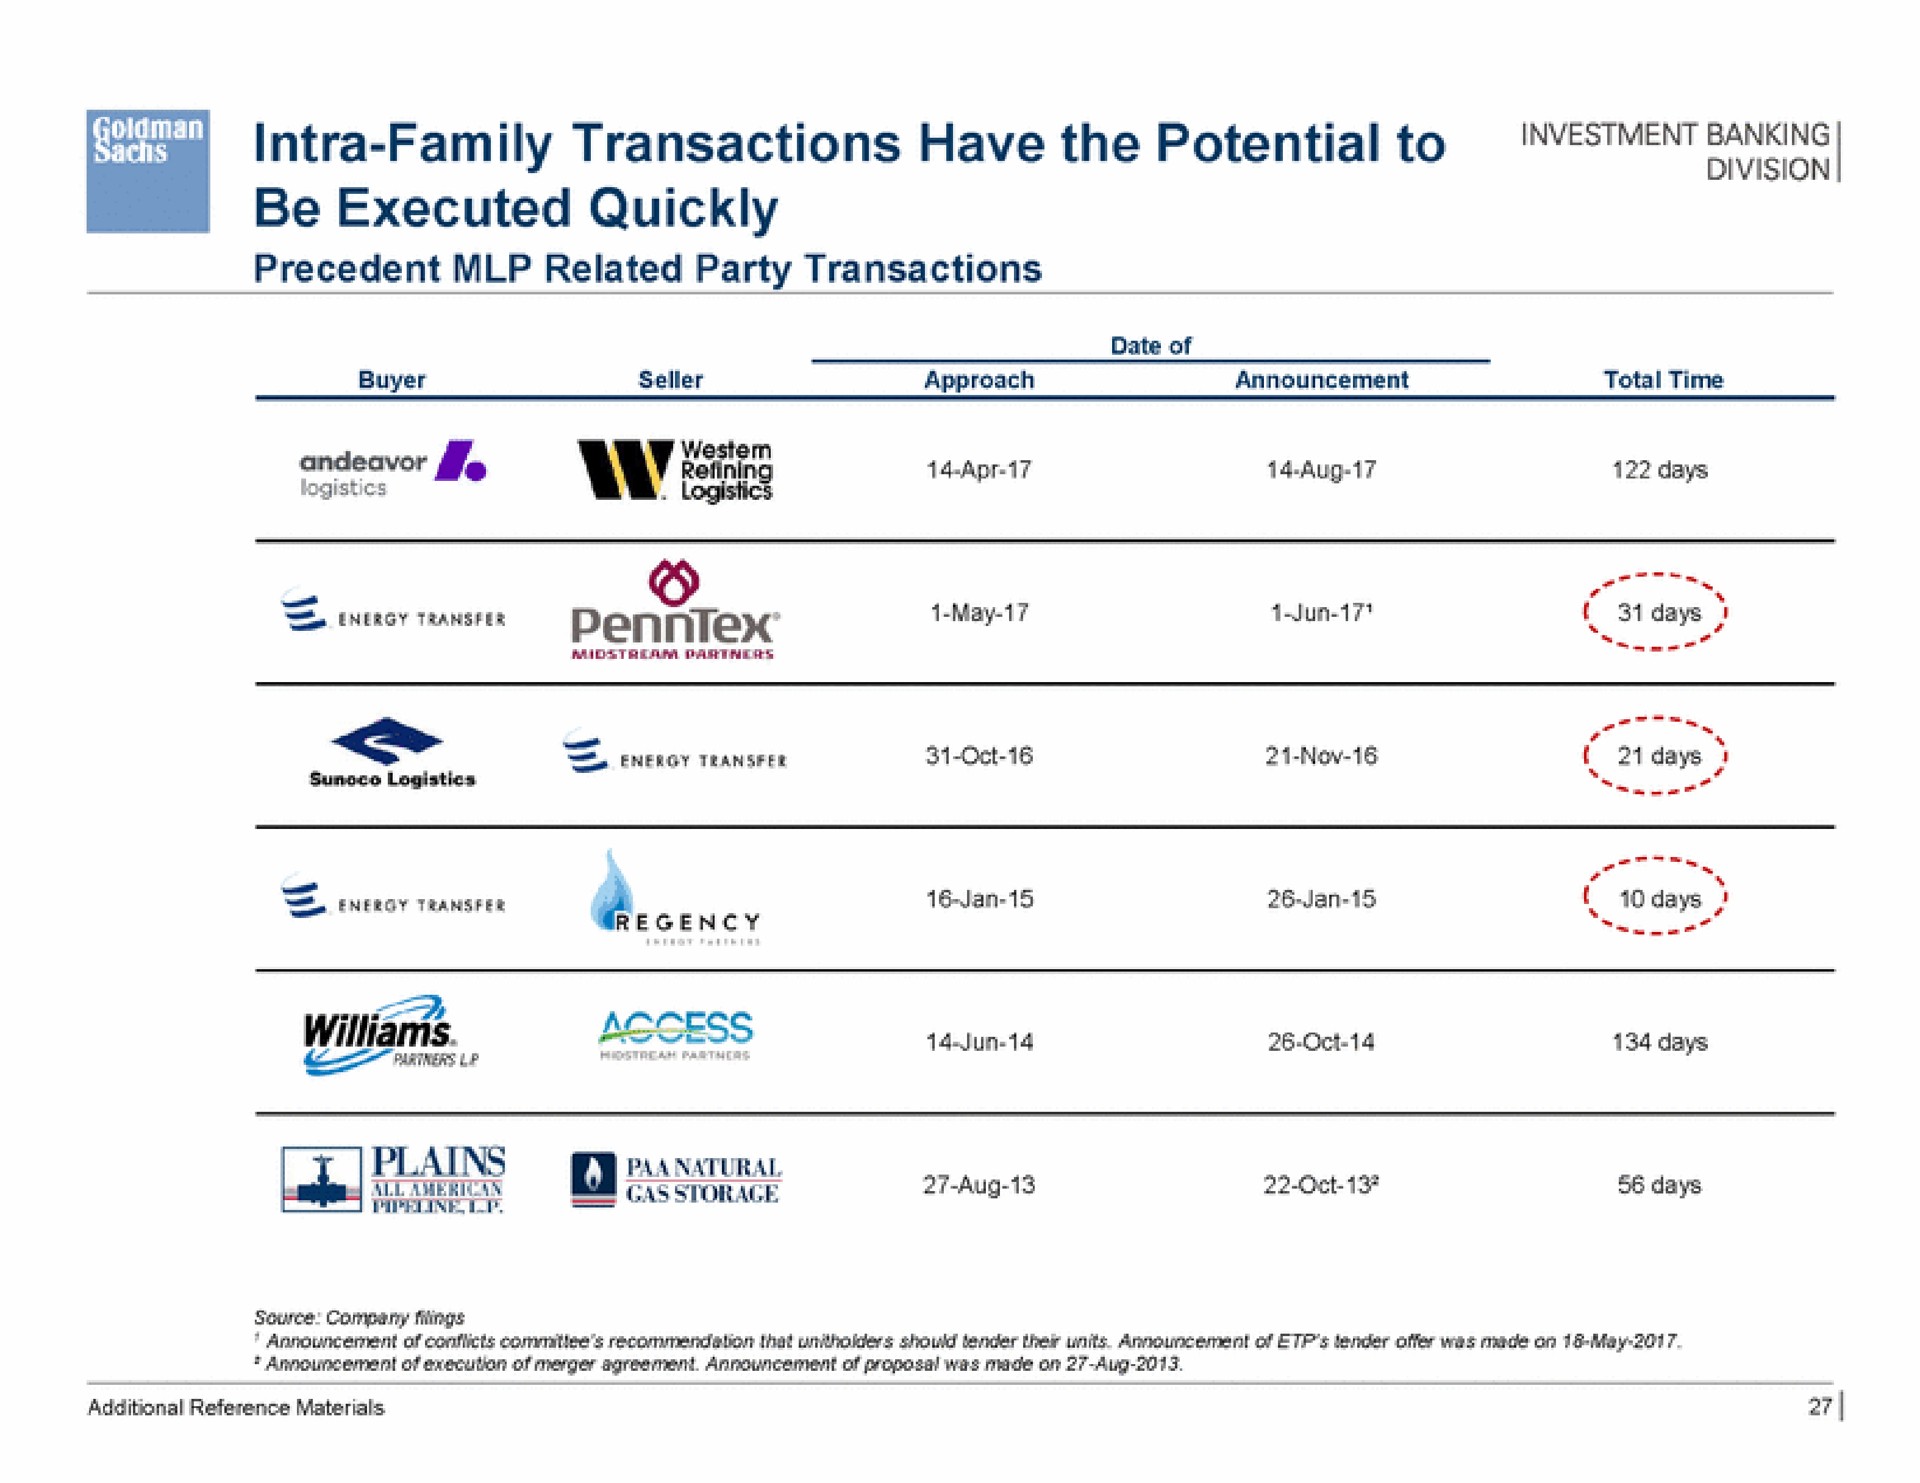 family transactions have the potential to be executed quickly asse | Goldman Sachs